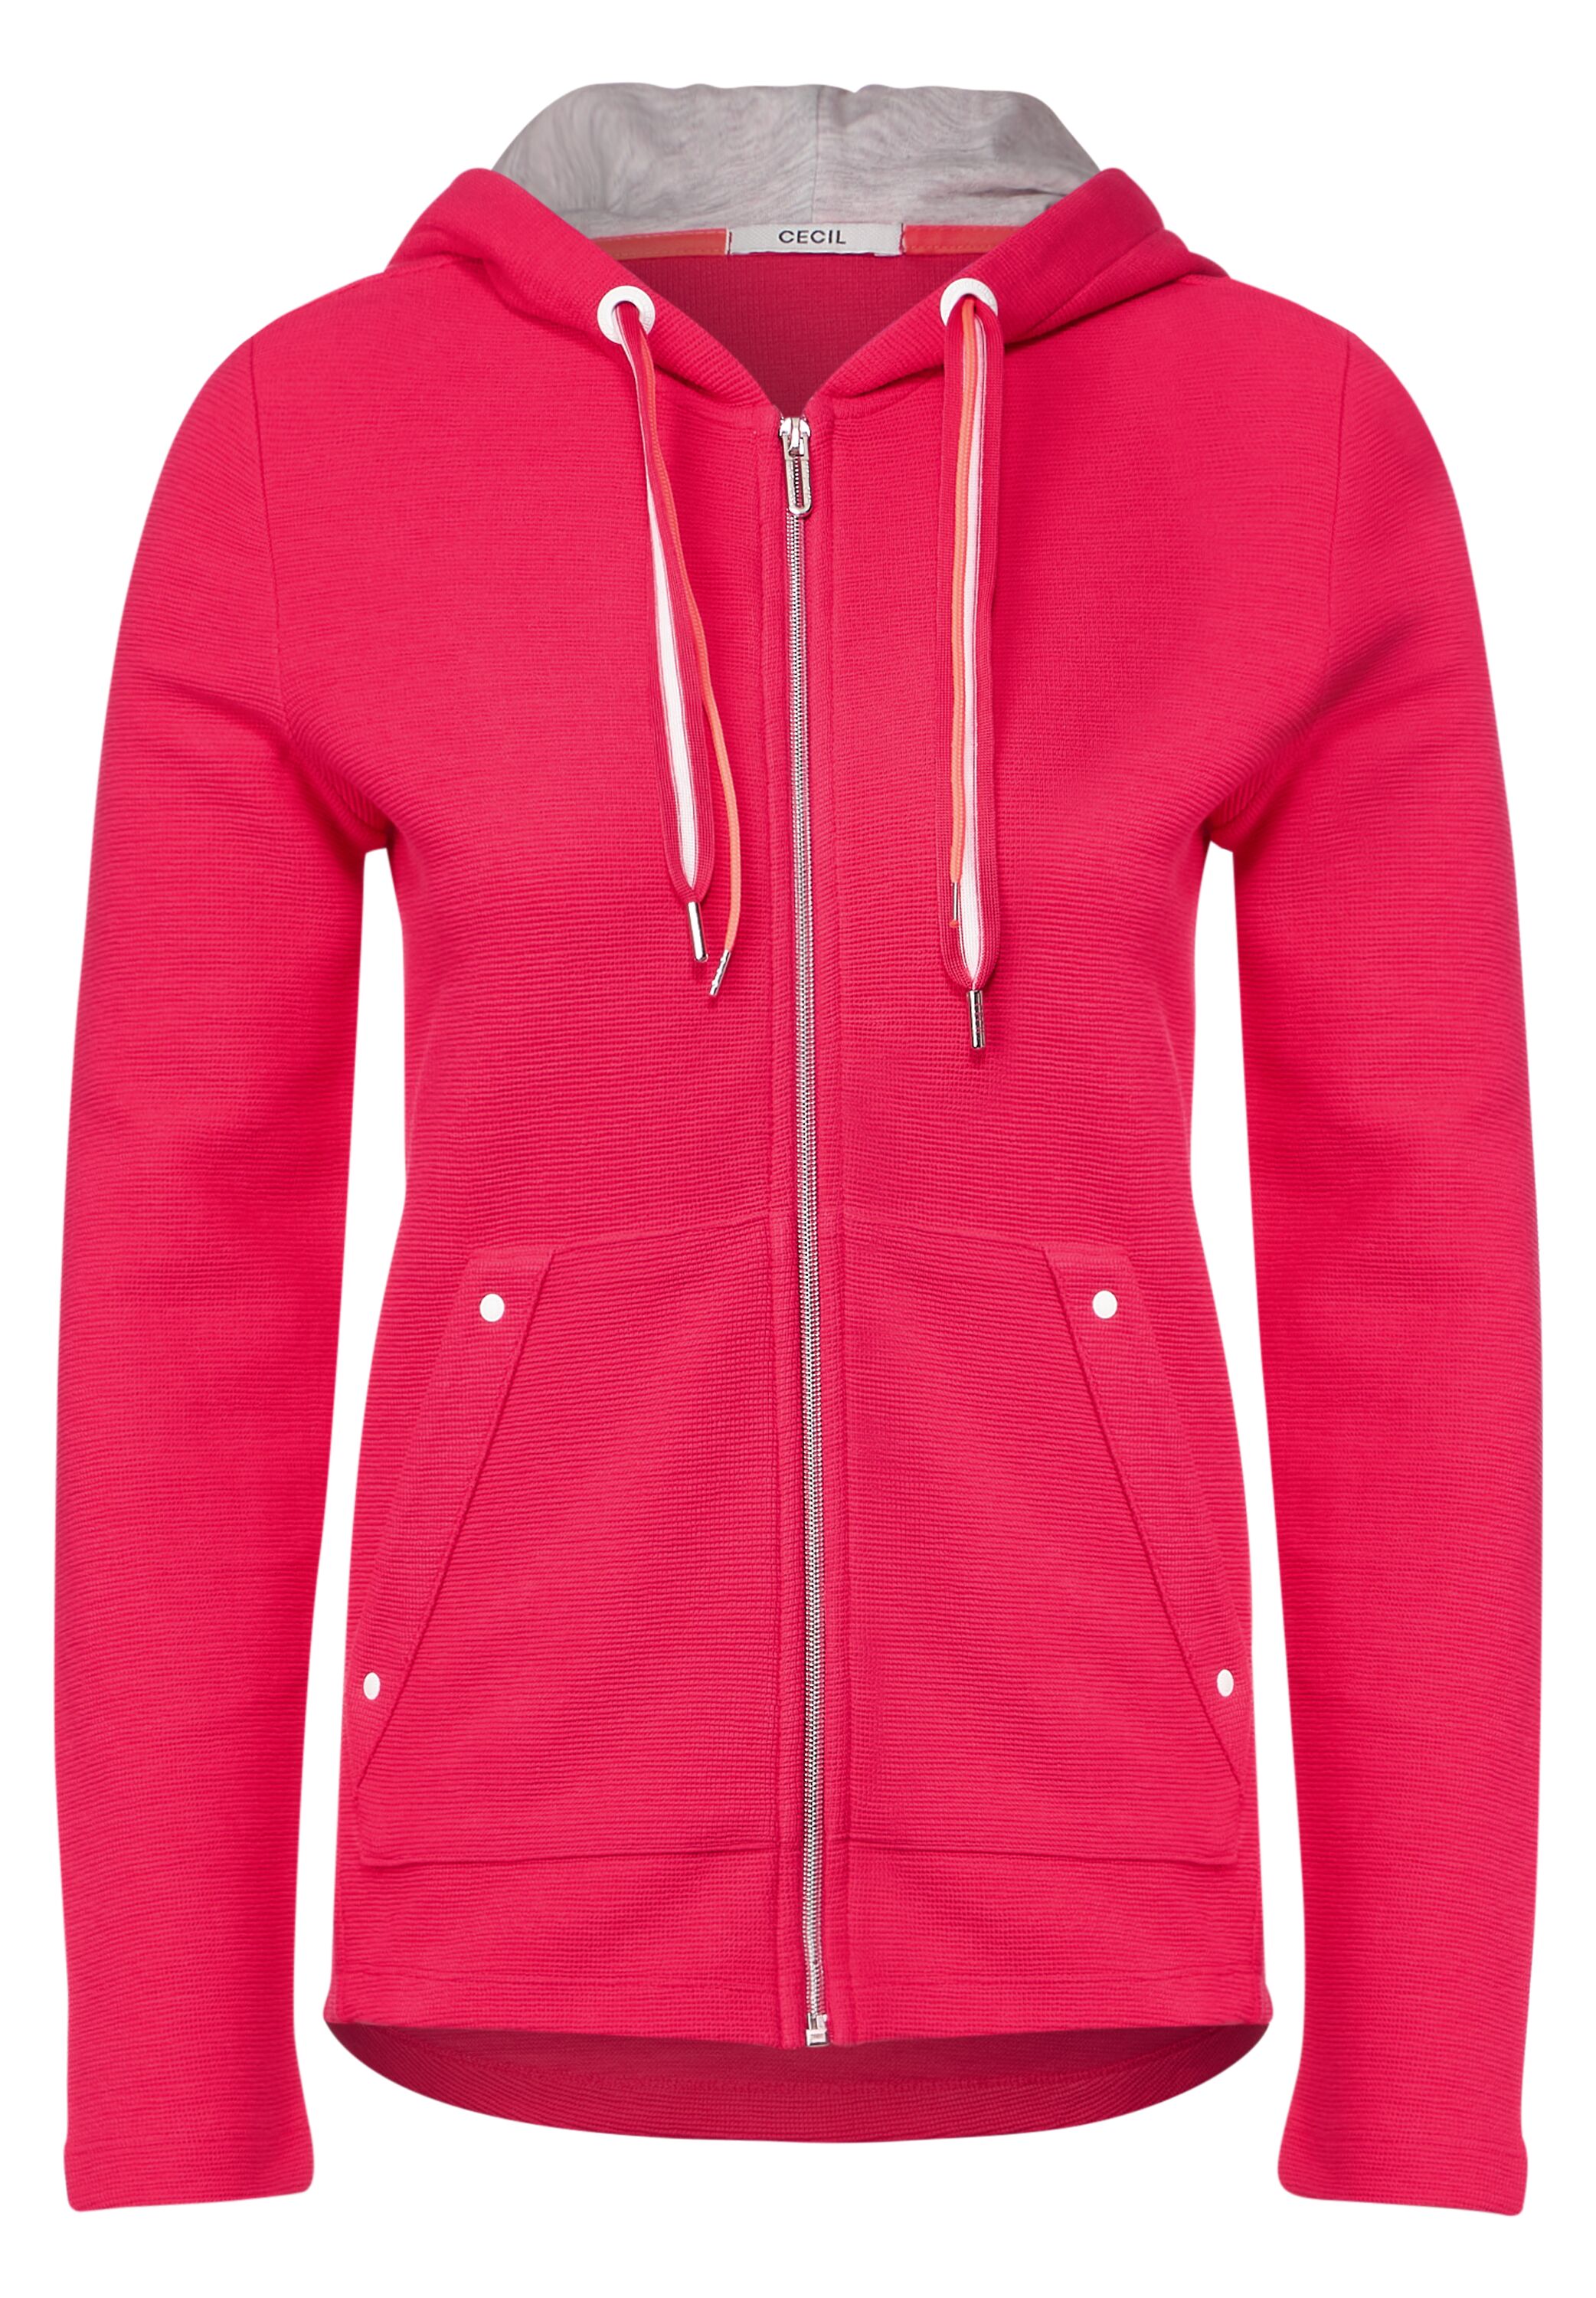 CECIL Shirtjacke in Strawberry im SALE B319398-14472 reduziert CONCEPT - Red Mode